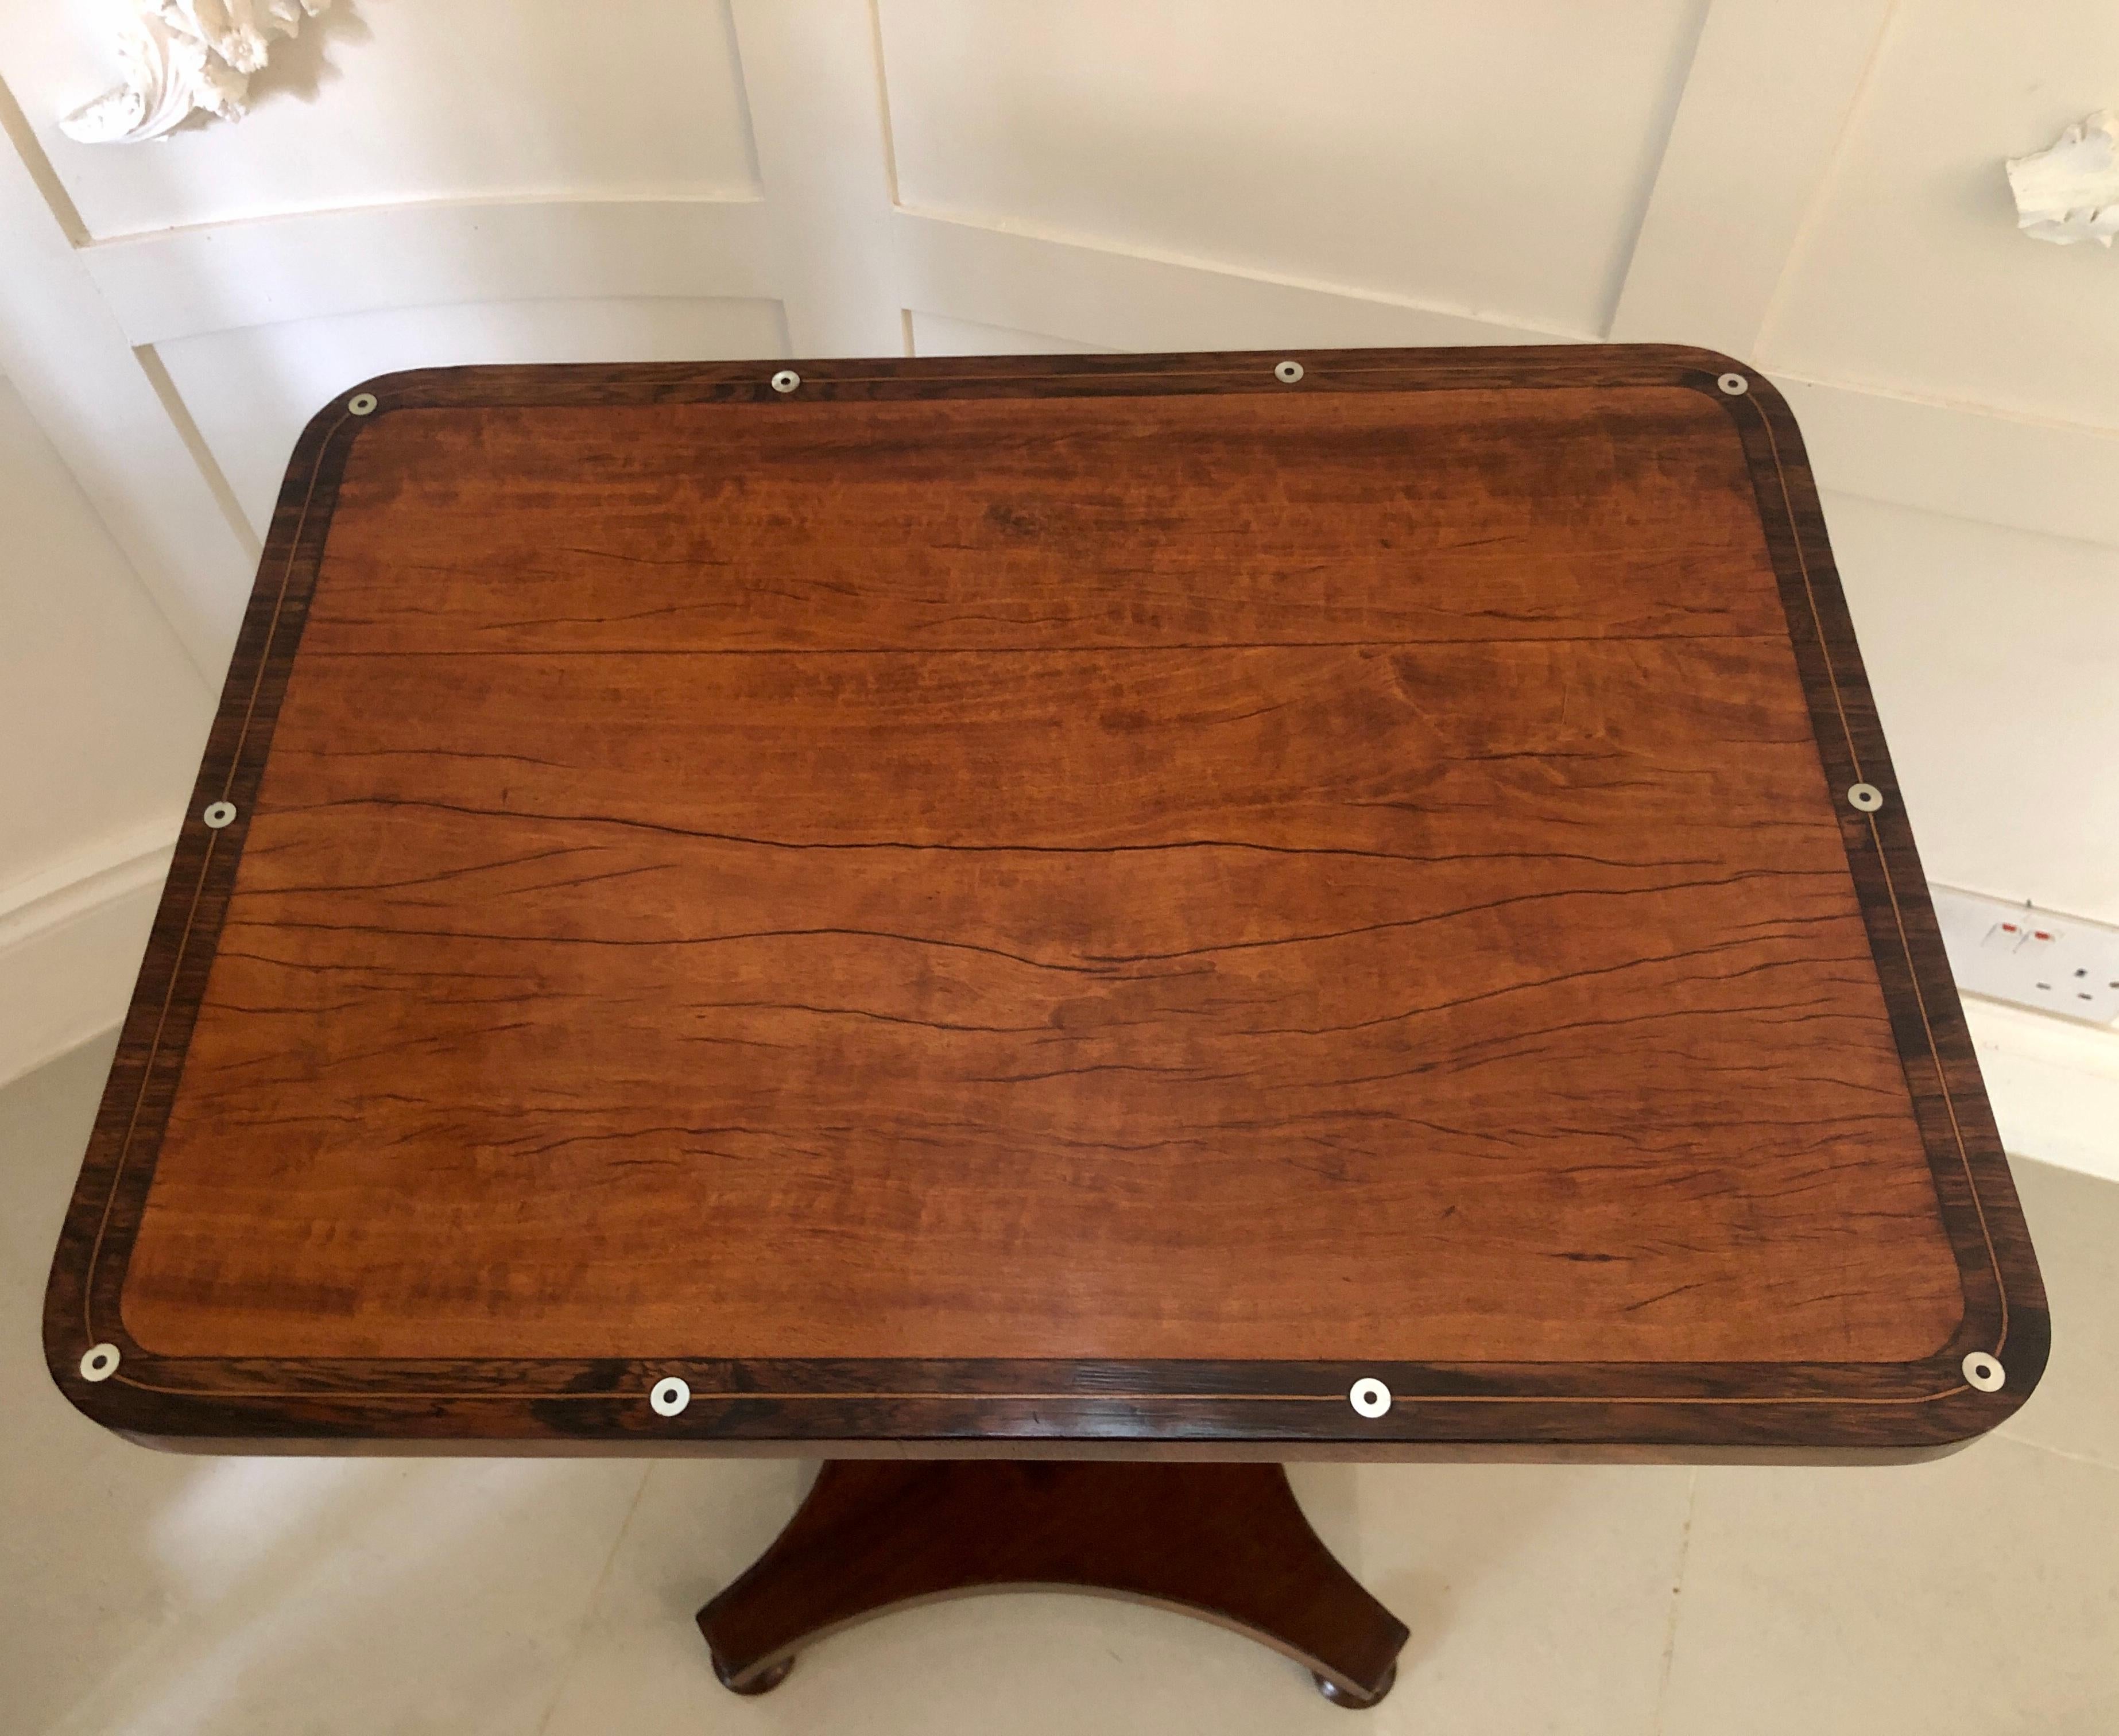 Unusual antique William IV satinwood inlaid lamp table having a lovely quality cross-banded satinwood top with inlay design and shaped rosewood frieze. It is supported by a shaped turned column and raised on an elegantly shaped mahogany platform and